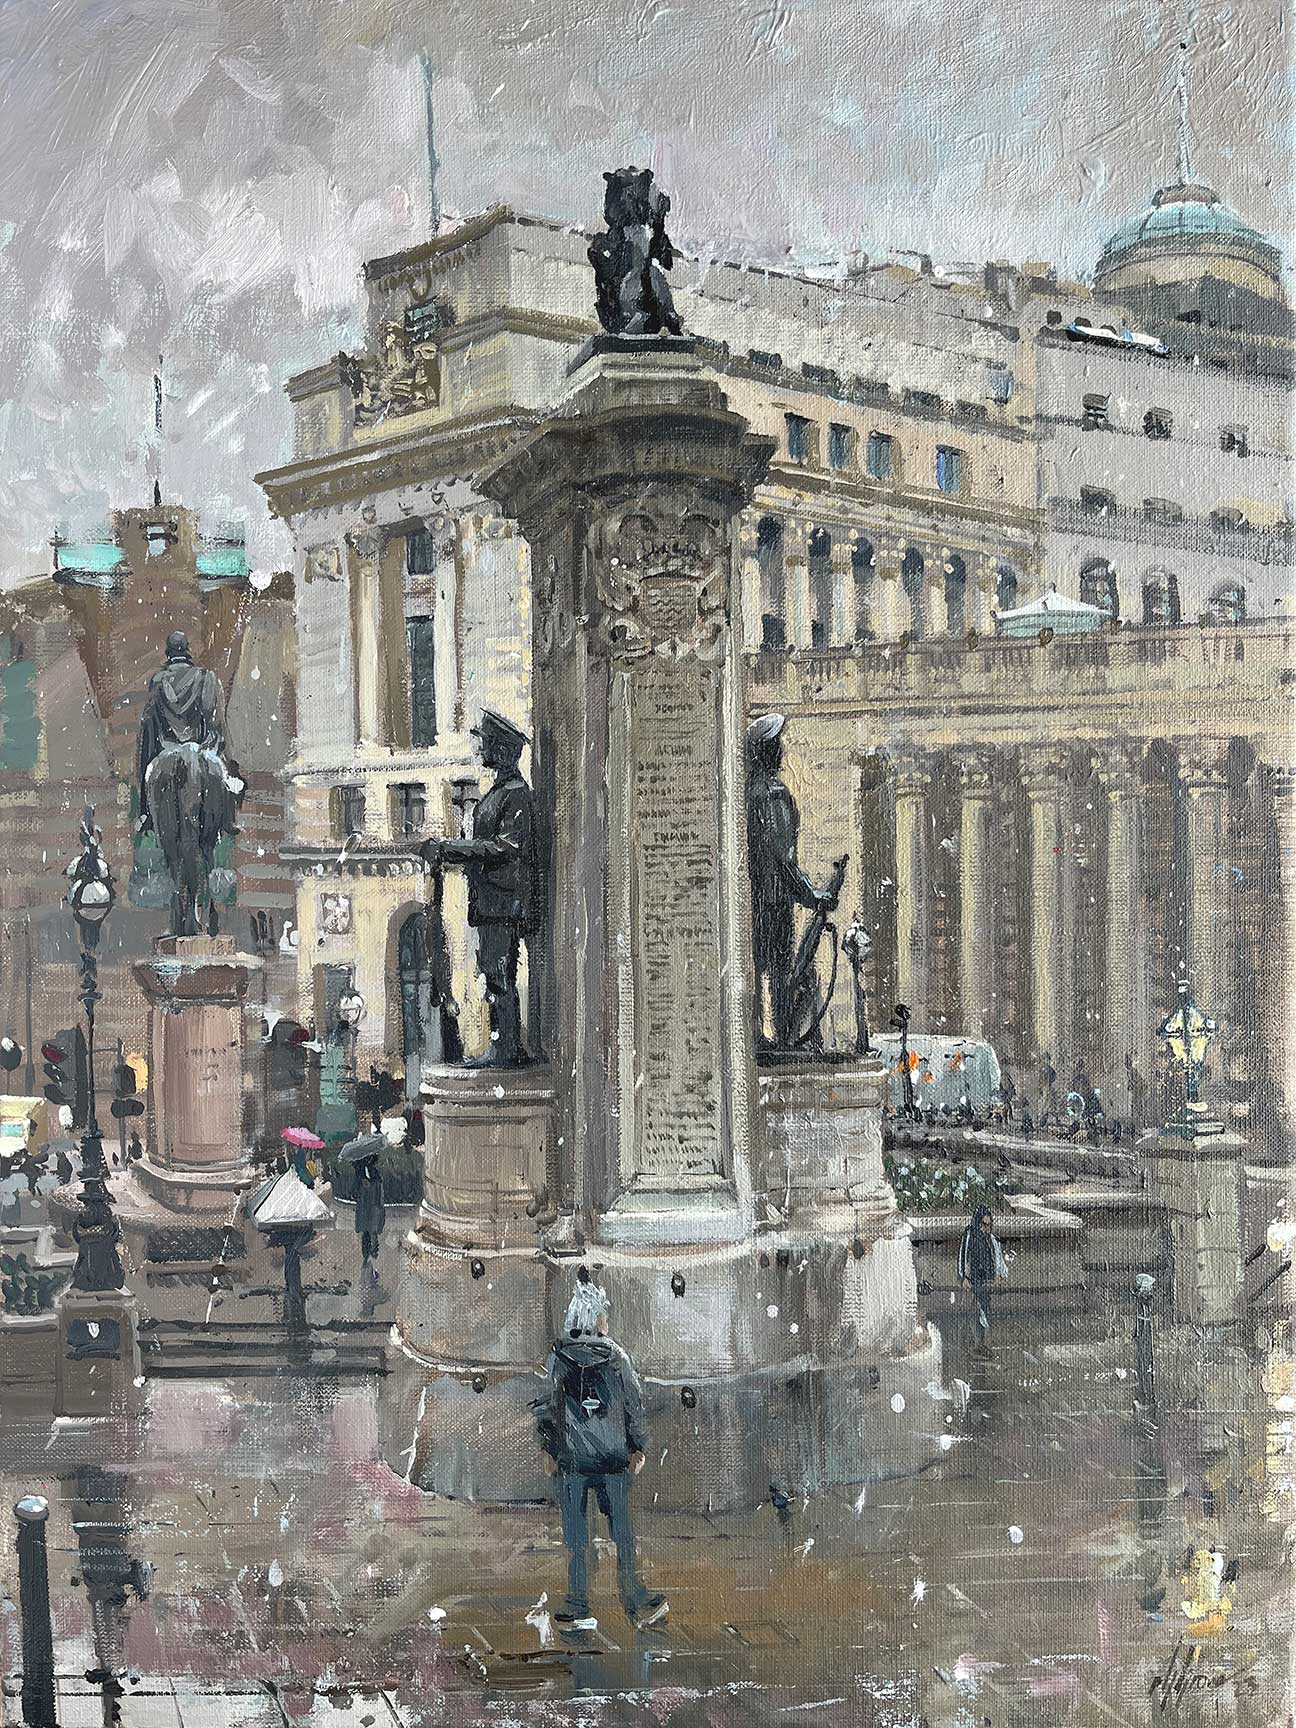 'The London Troops War Memorial', 18x24in, oil on canvas. A wet and rainy scene of London from Bank. Created by award winning artist Nick Grove RSMA.